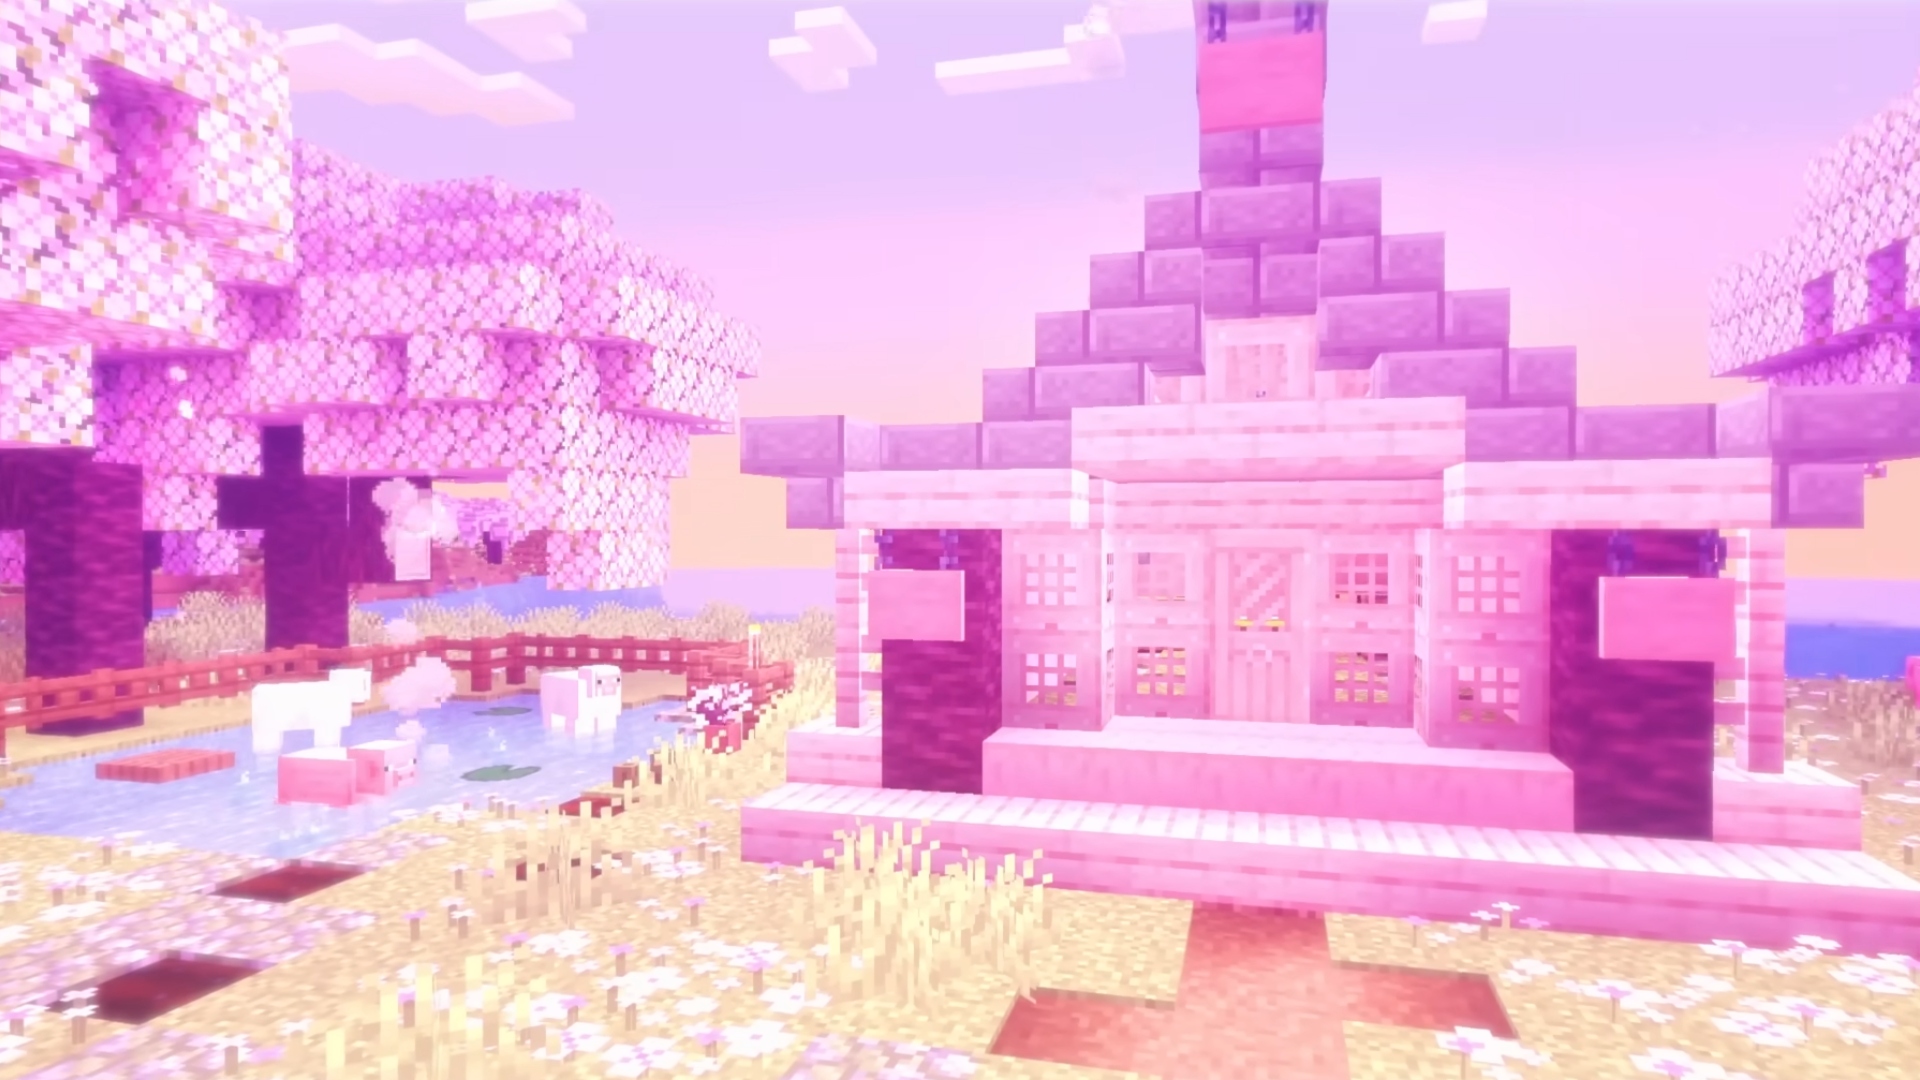 Best cross-platform games: Minecraft. Image shows a house created in the game, surrounded by sheep and cherry blossoms.